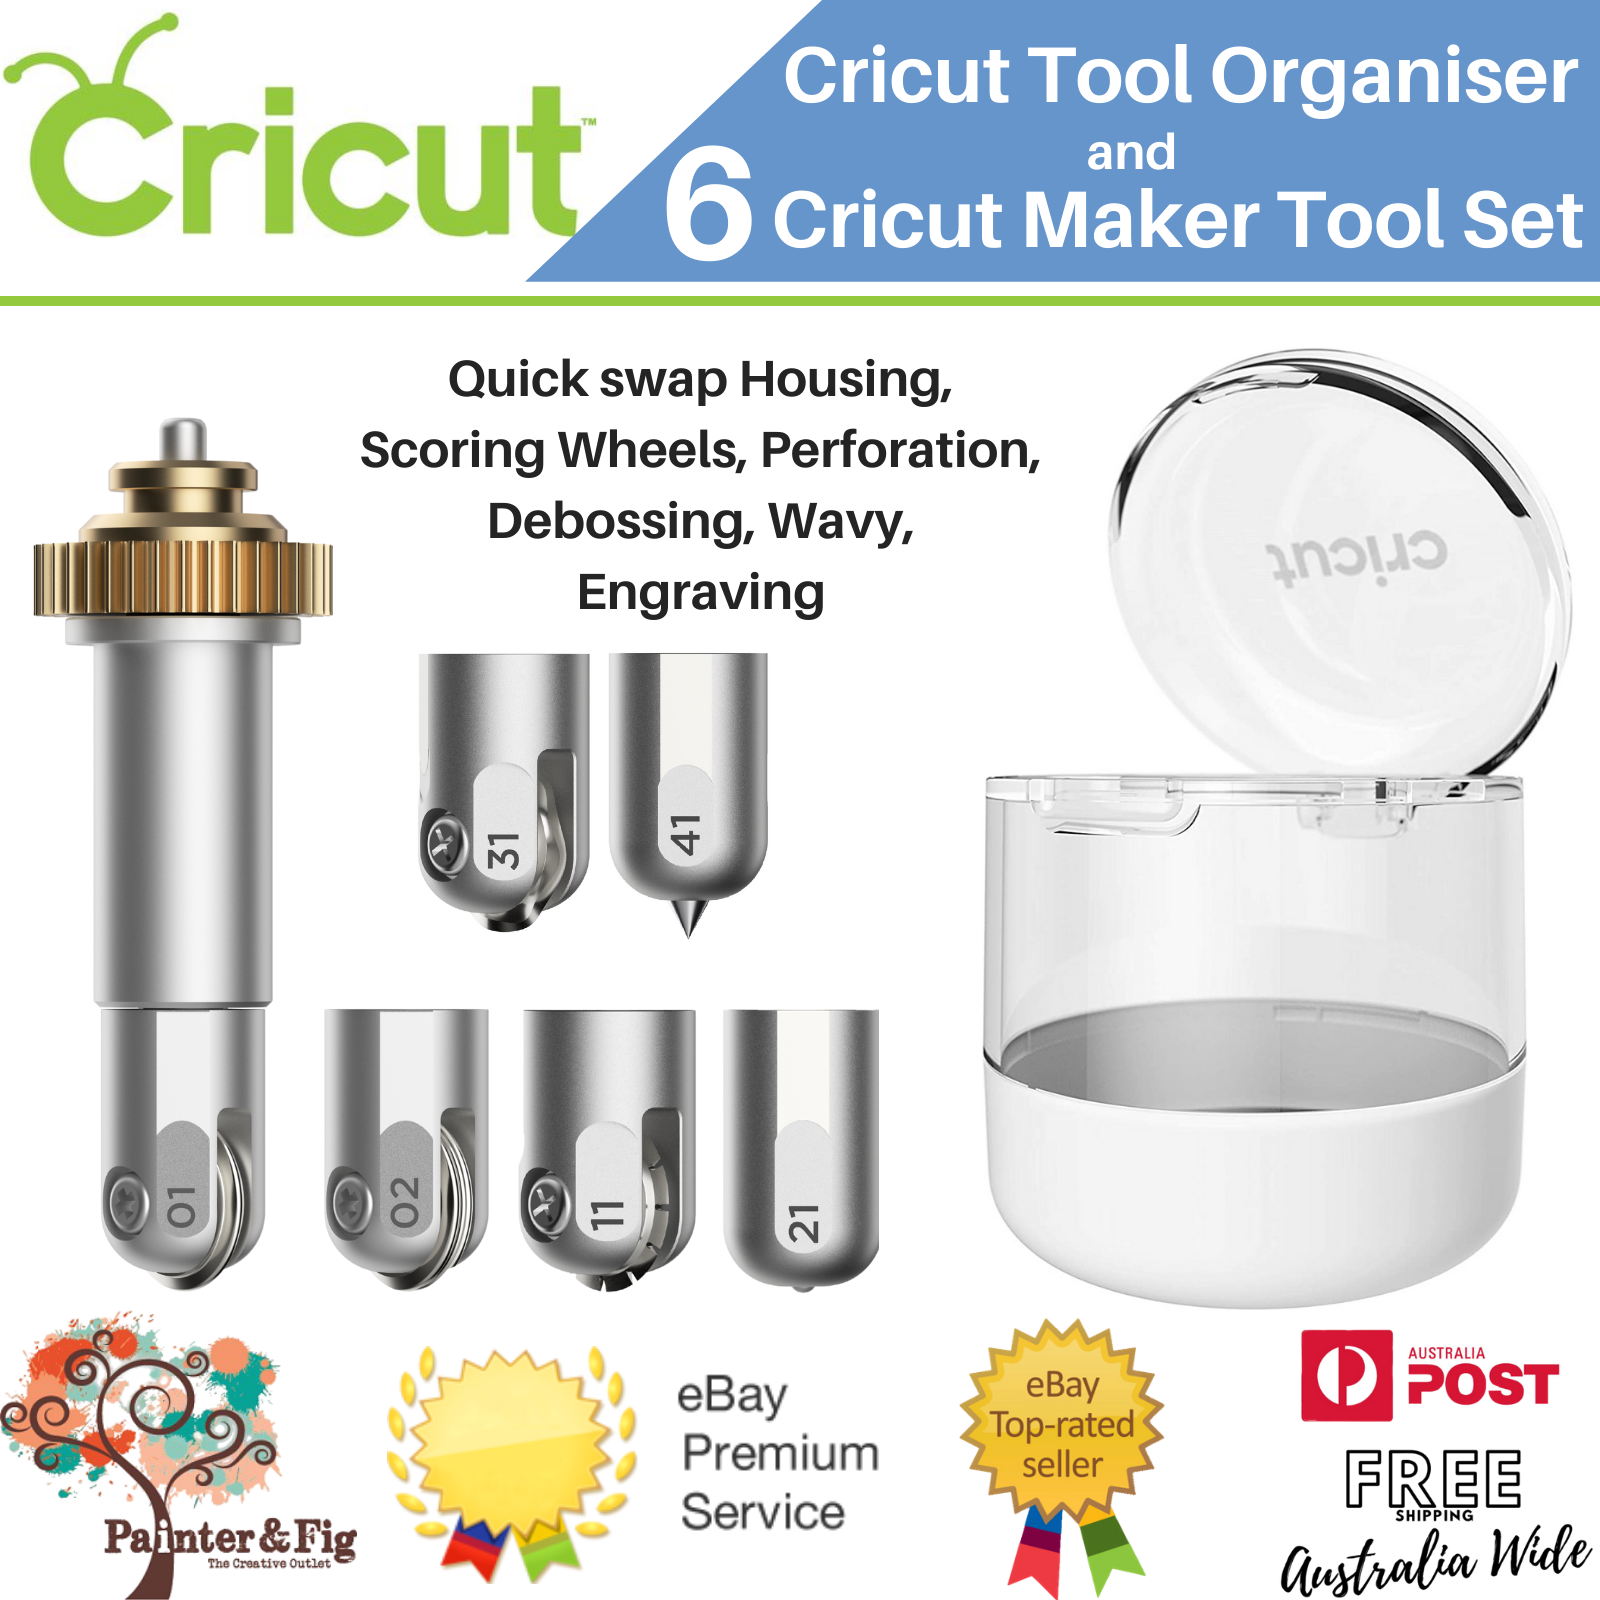  Cricut Maker QuickSwap Housing with Perforation Blade,  Engraving Tip and Fine Debossing Tip Bundle - Create Custom Raffle Tickets,  Cards and Engravings, Craft Cutting Machine Tools (11, 41, 21)